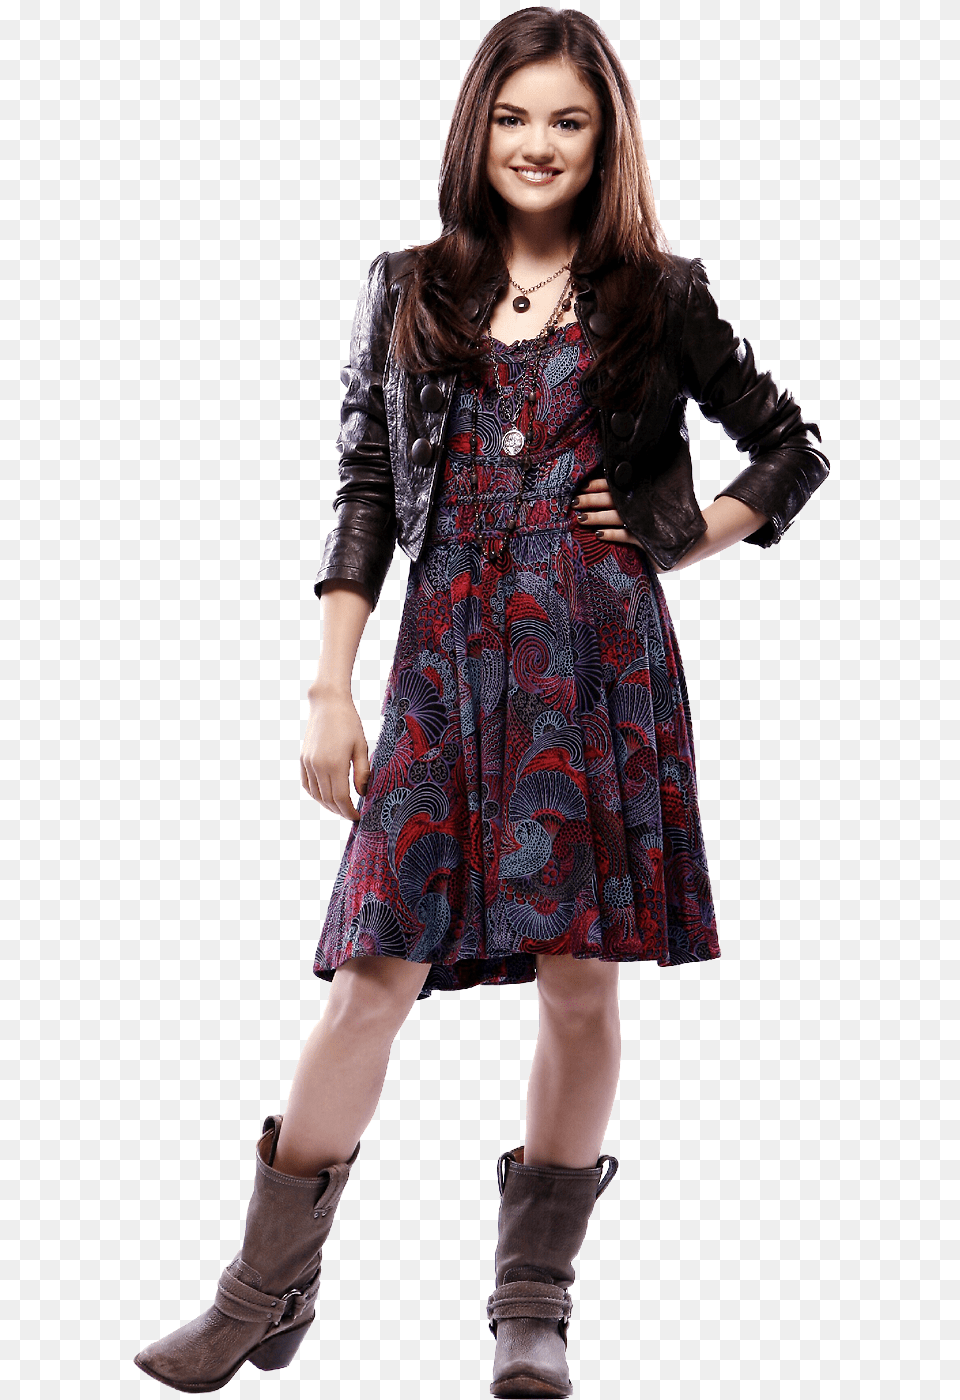 With Lucy Hale Aria Pretty Little Liars Looks, Teen, Person, Jacket, Girl Free Png Download